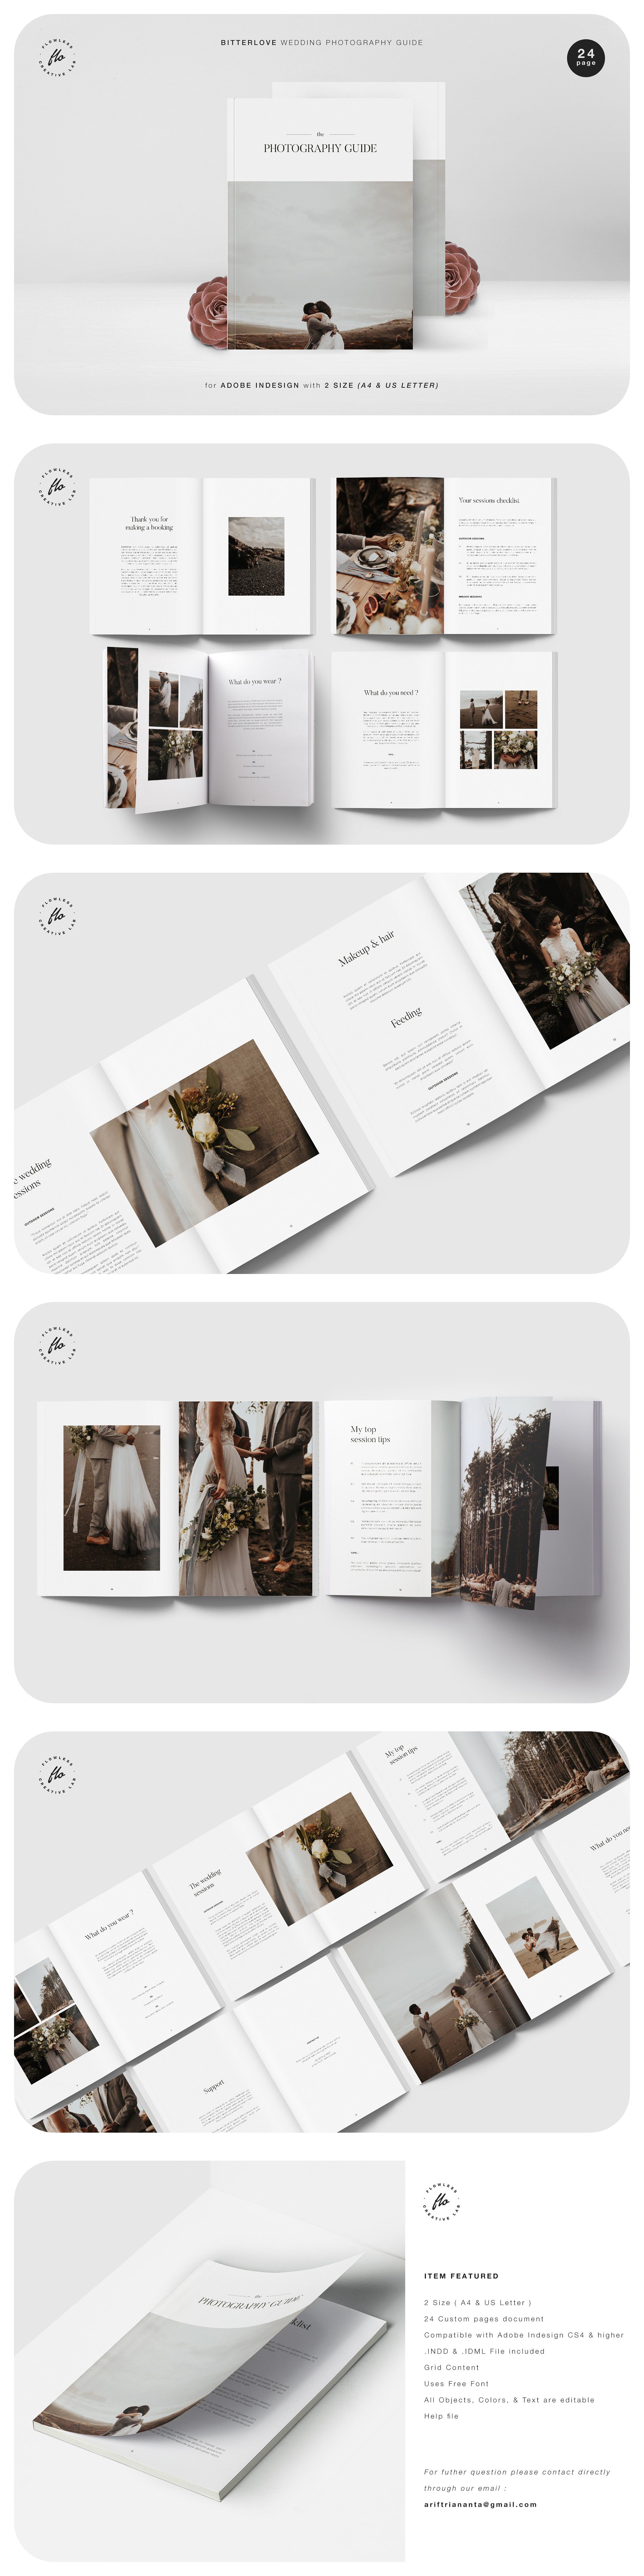 Bitterlove Wedding Photography Guide With Images Wedding